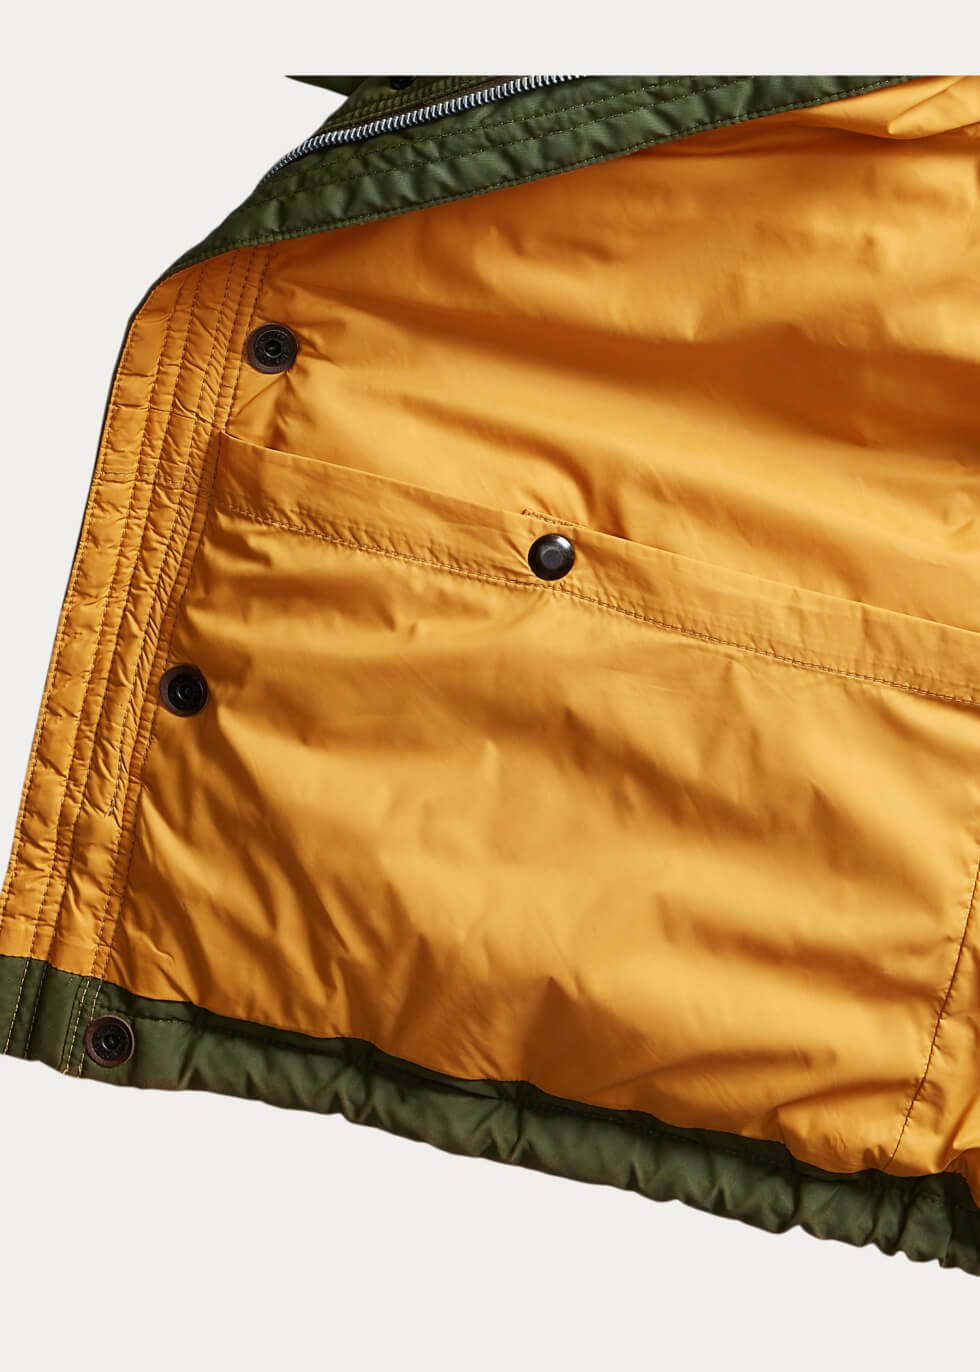 Brave The Snow With Ralph Lauren's Coated Twill Quilted Jacket